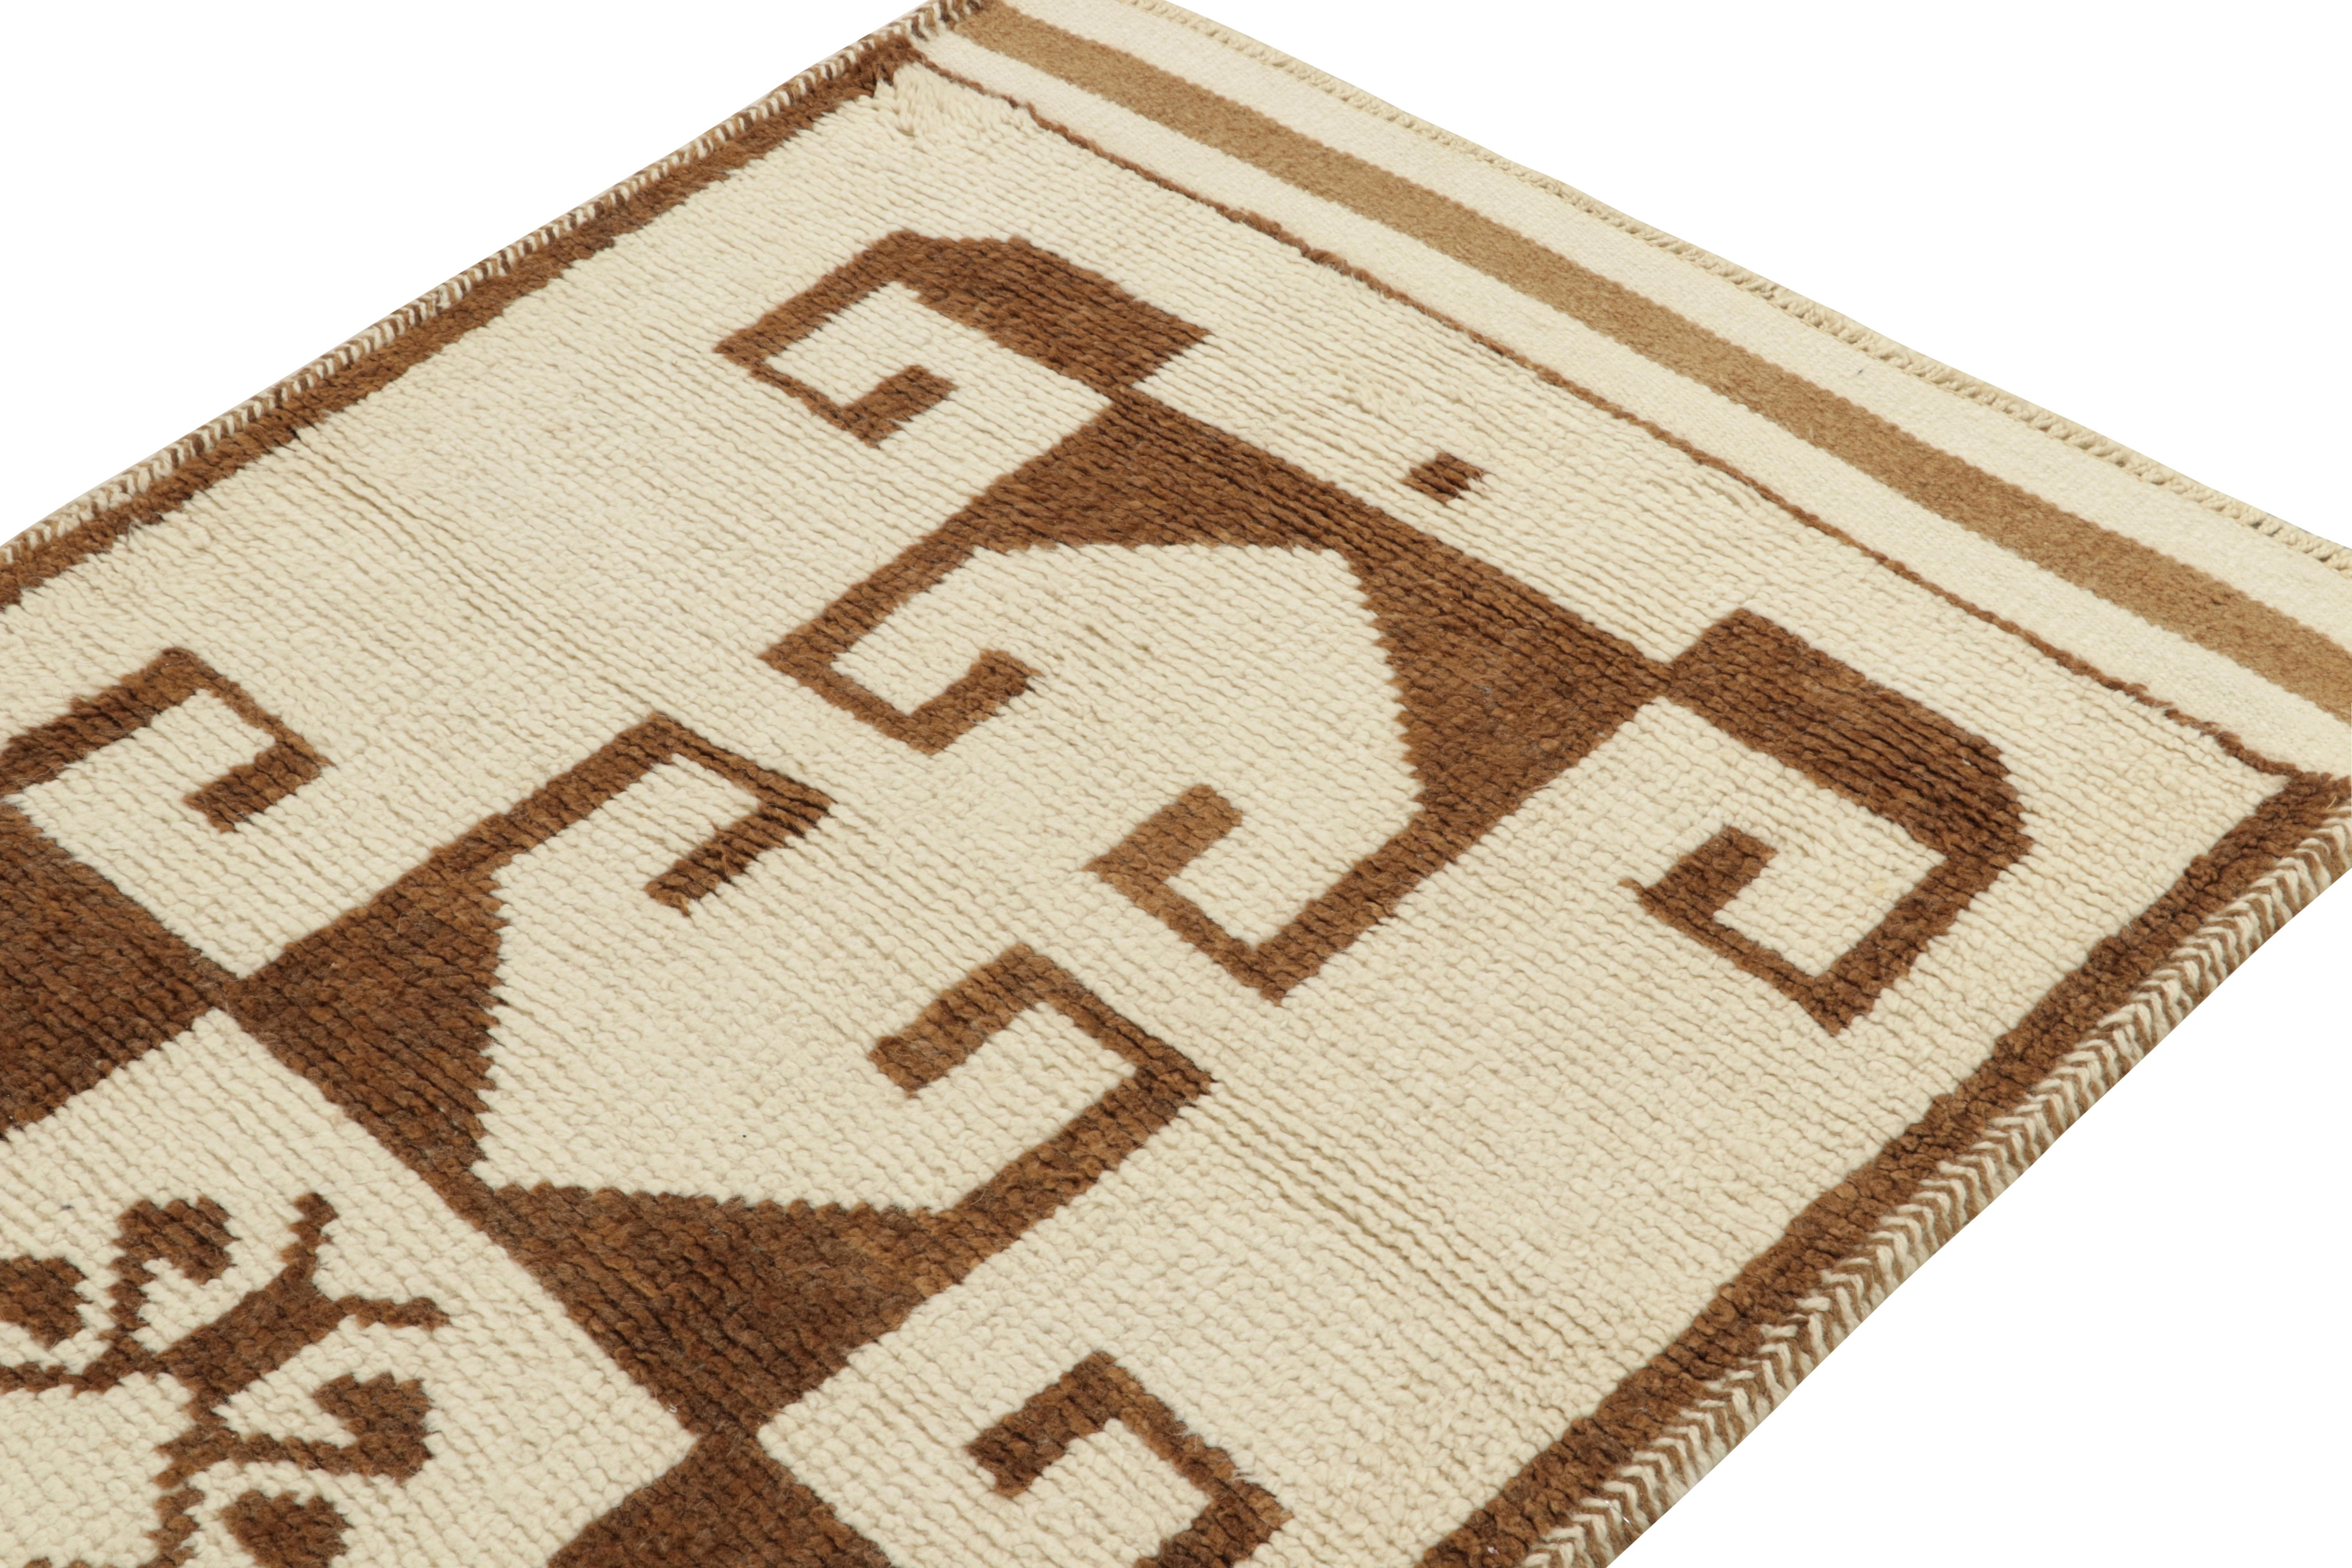 Hand-Knotted Vintage Tribal Runner in White & Beige-Brown Medallion Patterns by Rug & Kilim For Sale